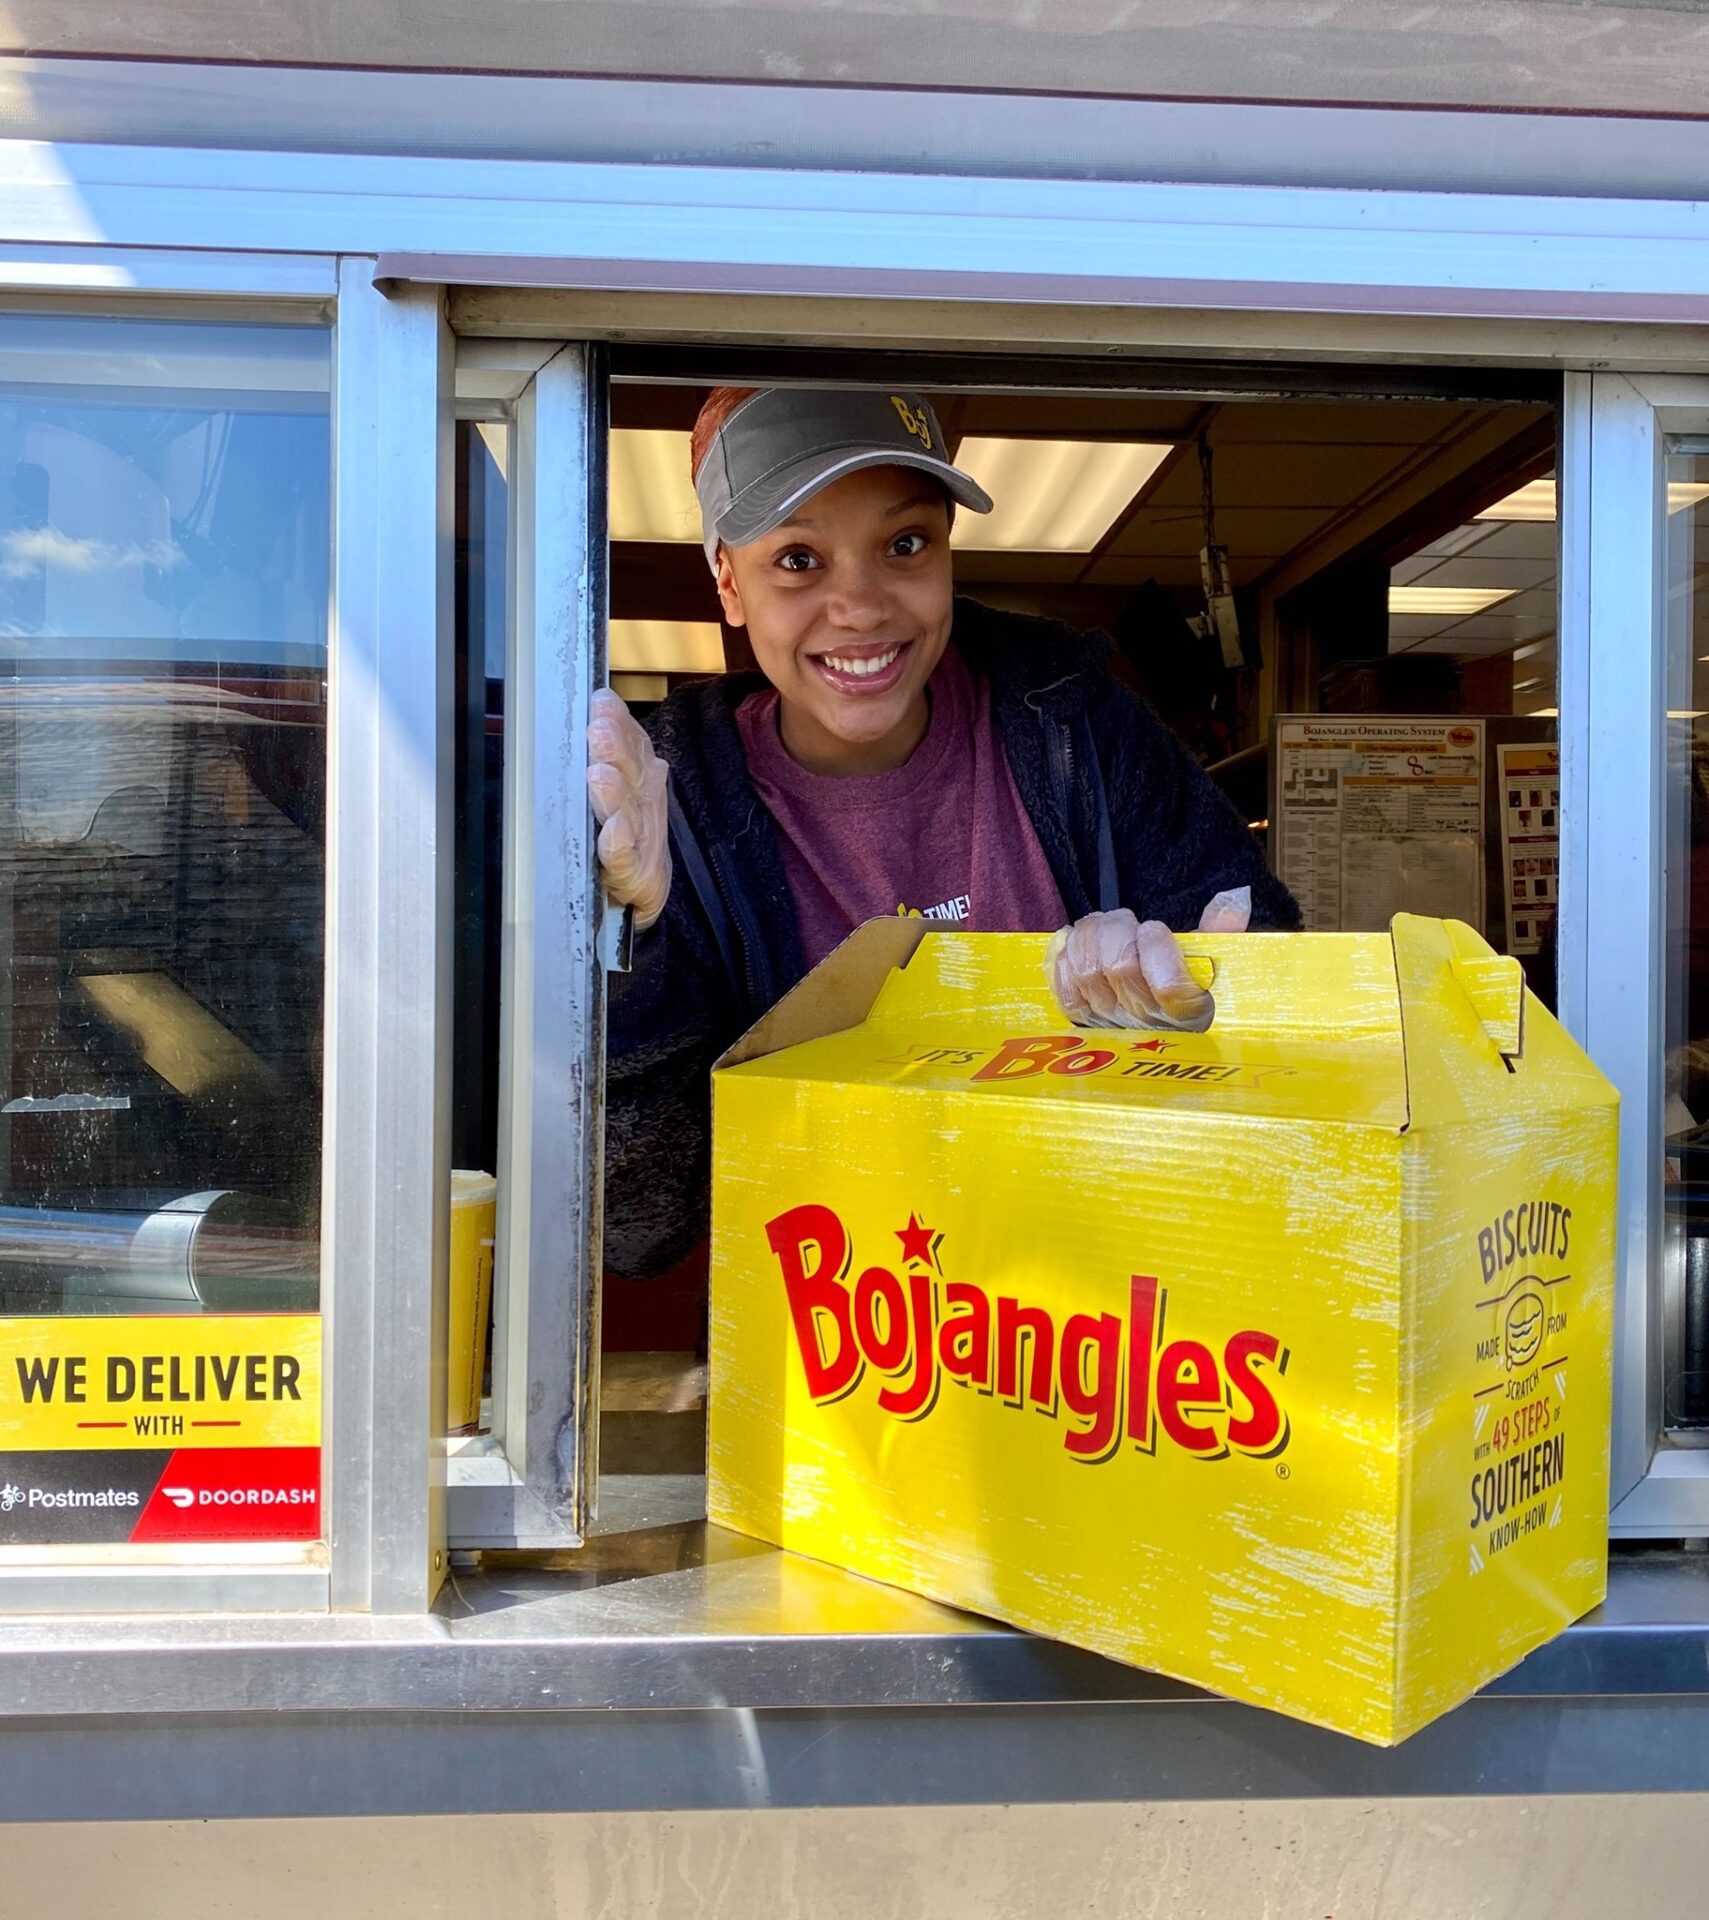 Bojangles: Decreased time-to-hire for staff by 80%